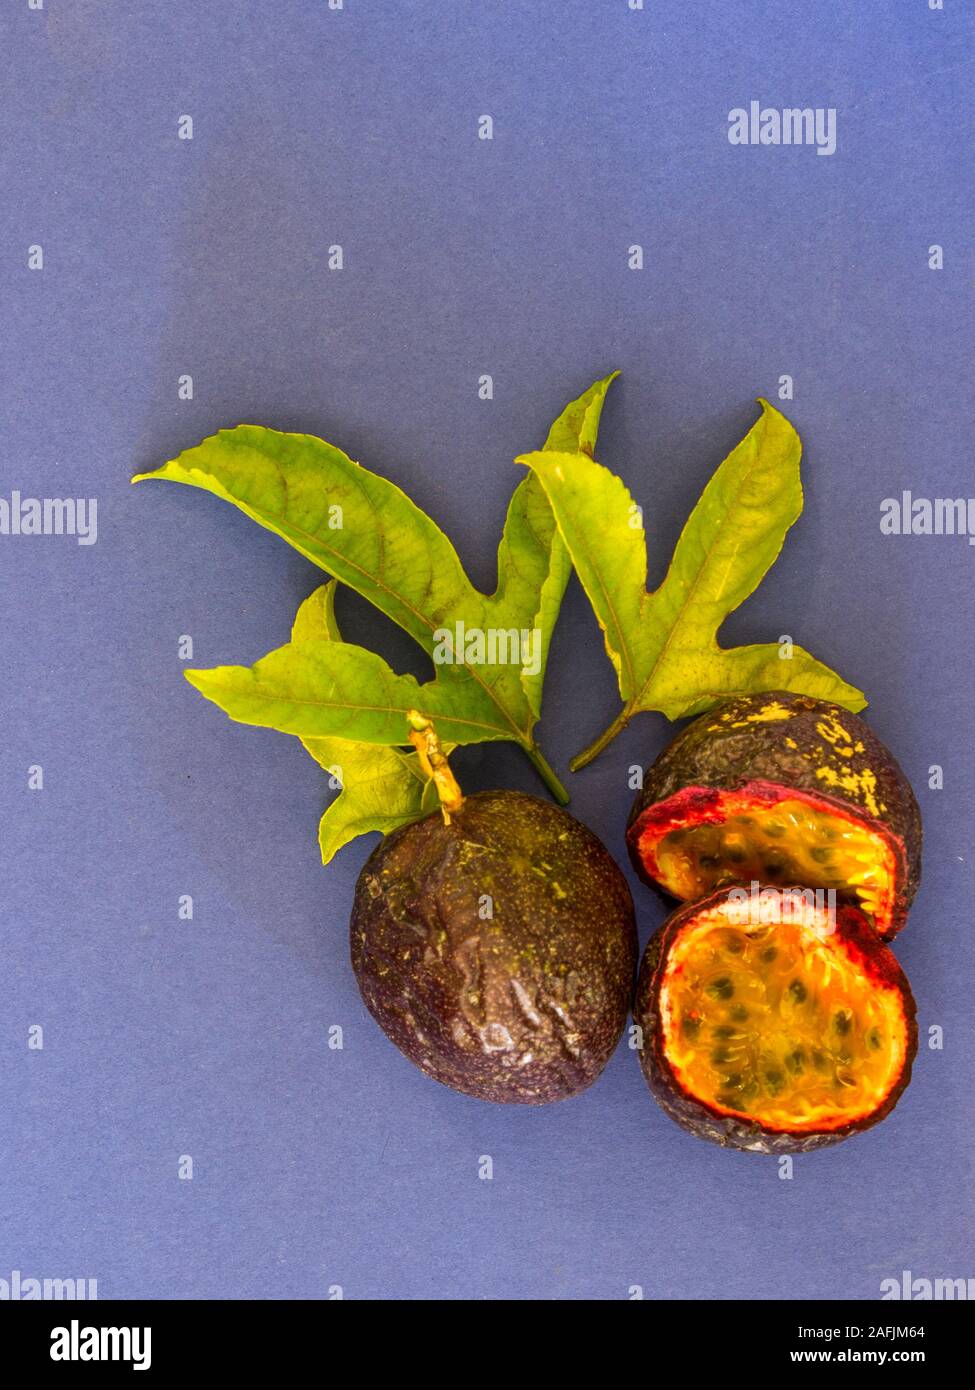 Lay flat composition showing a whole passion fruit and a sliced passion fruit with some of the vine leaves on a blue background Stock Photo